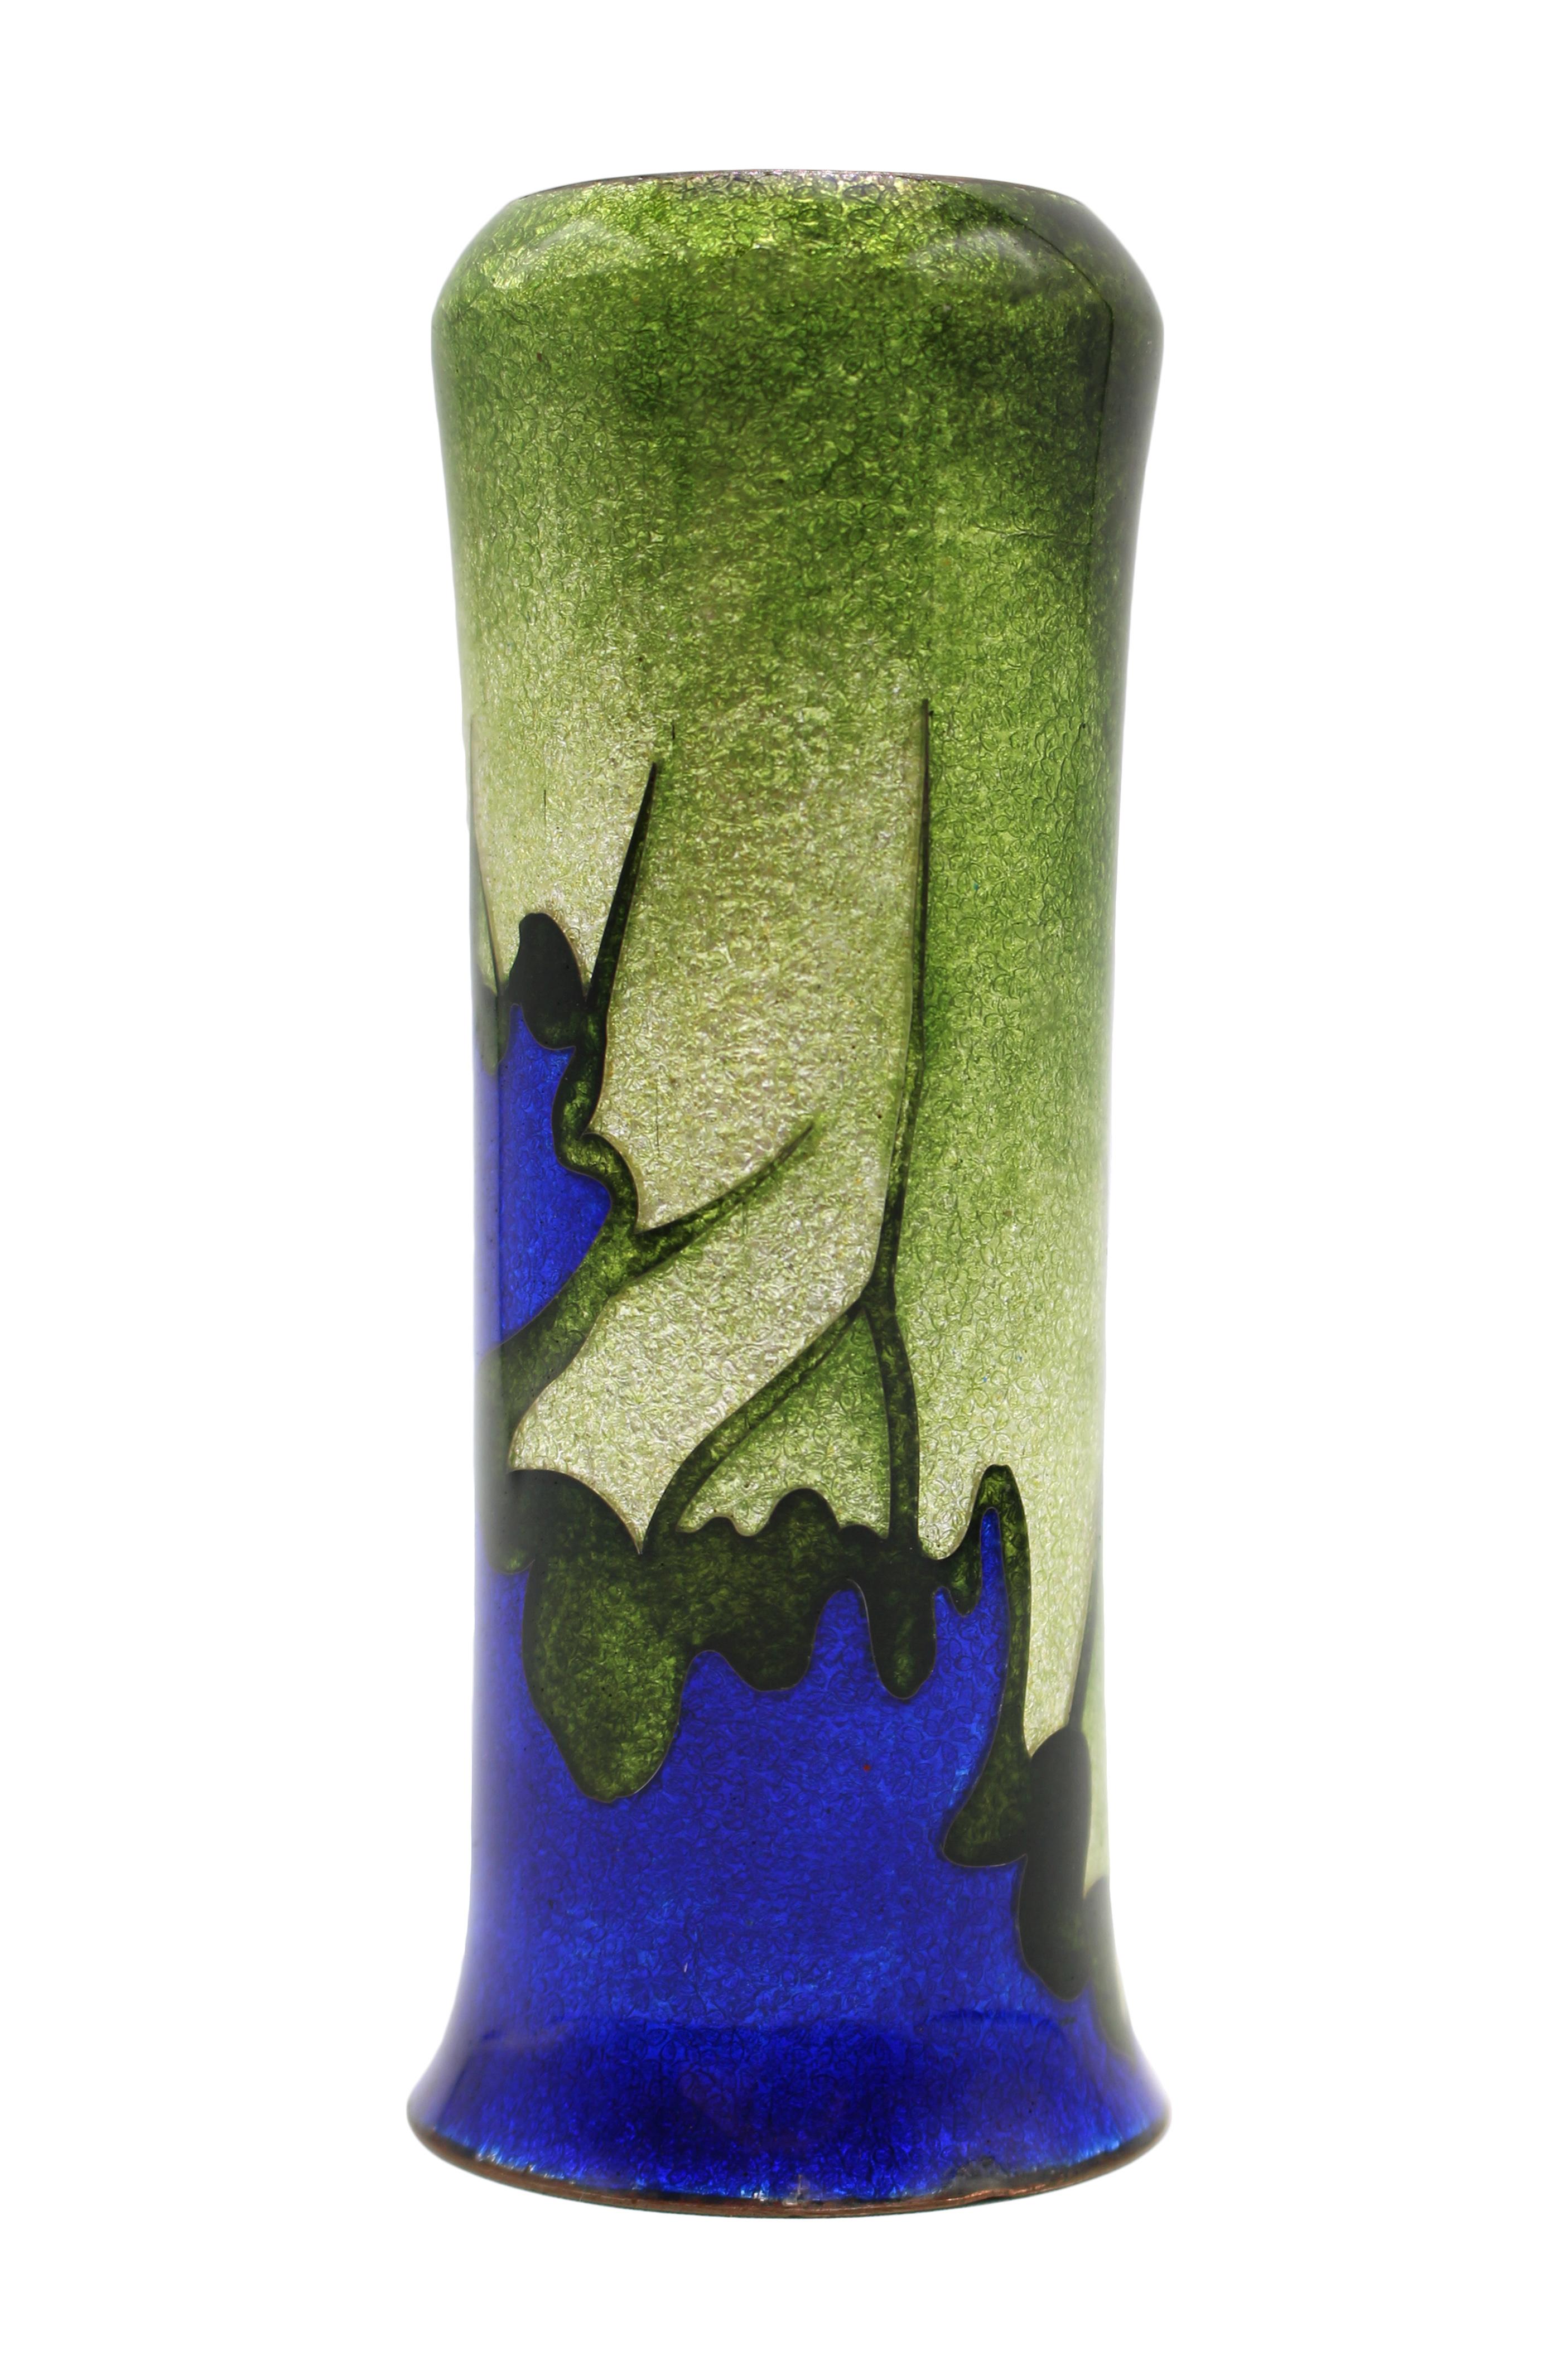 Circa 1890s Japanese Meiji period Ginbari cloisonné vase. A frog leaps across a green ground to create in our imaginations a deep blue splash of water. The historic spirit of Zen survives in an increasingly regimented Japanese world view in